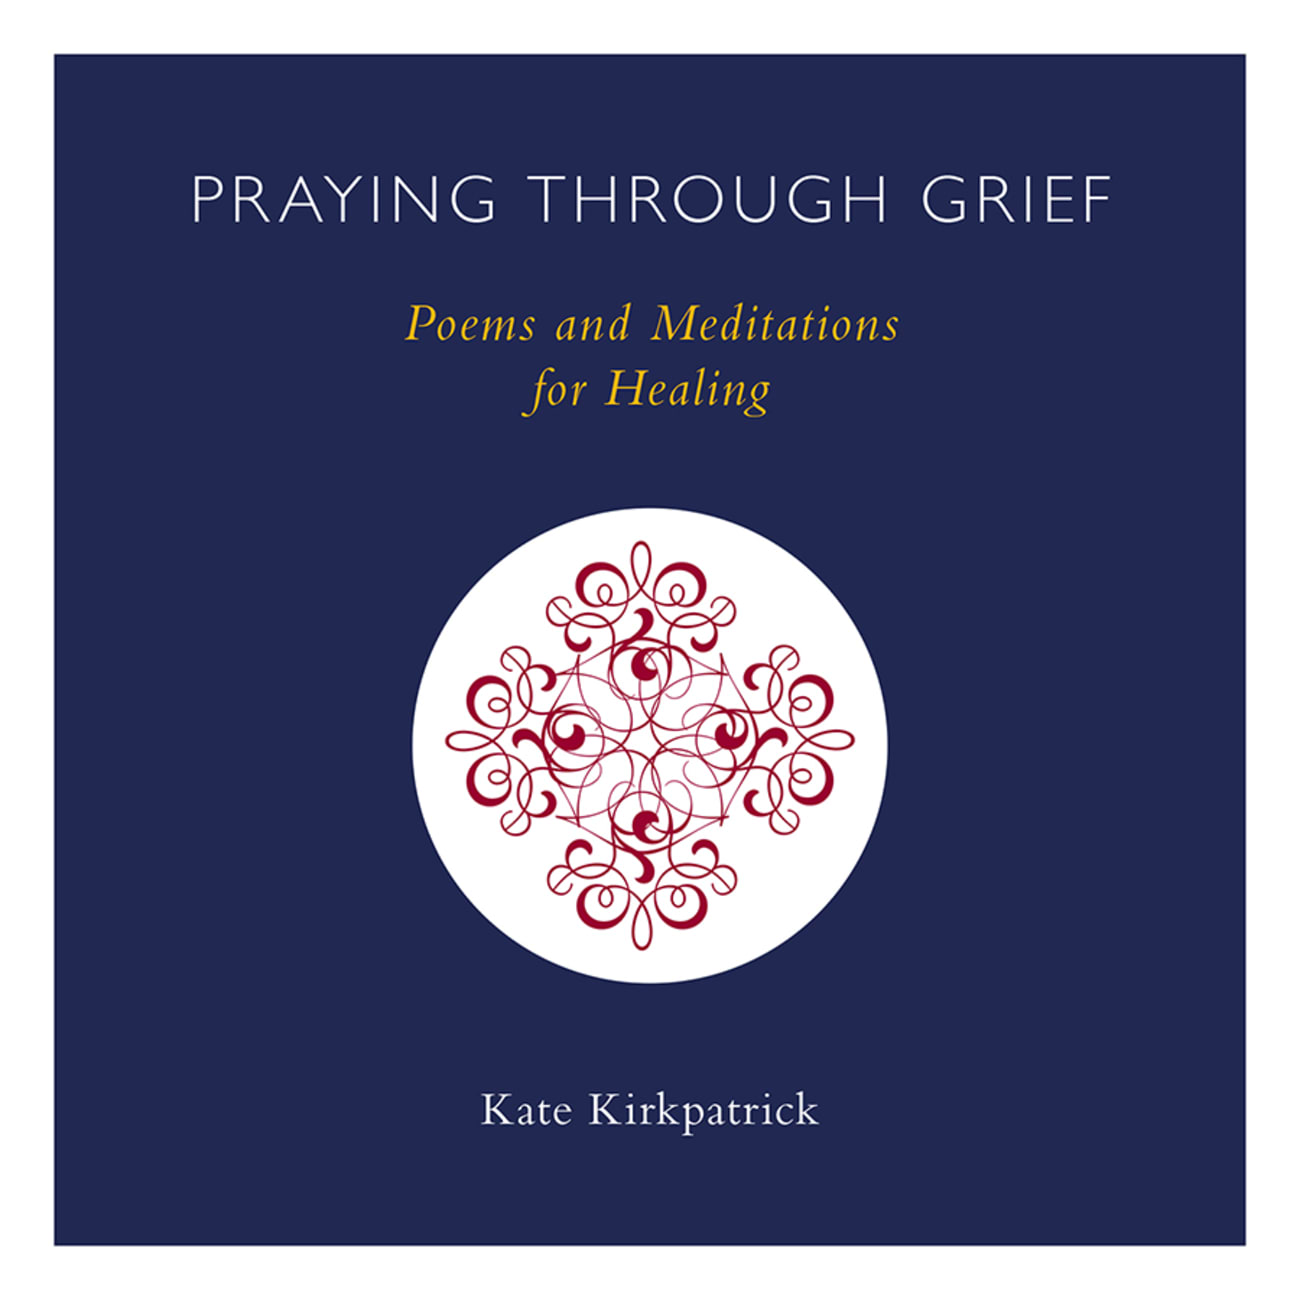 Praying Through Grief: Poems and Meditations For Healing Hardback